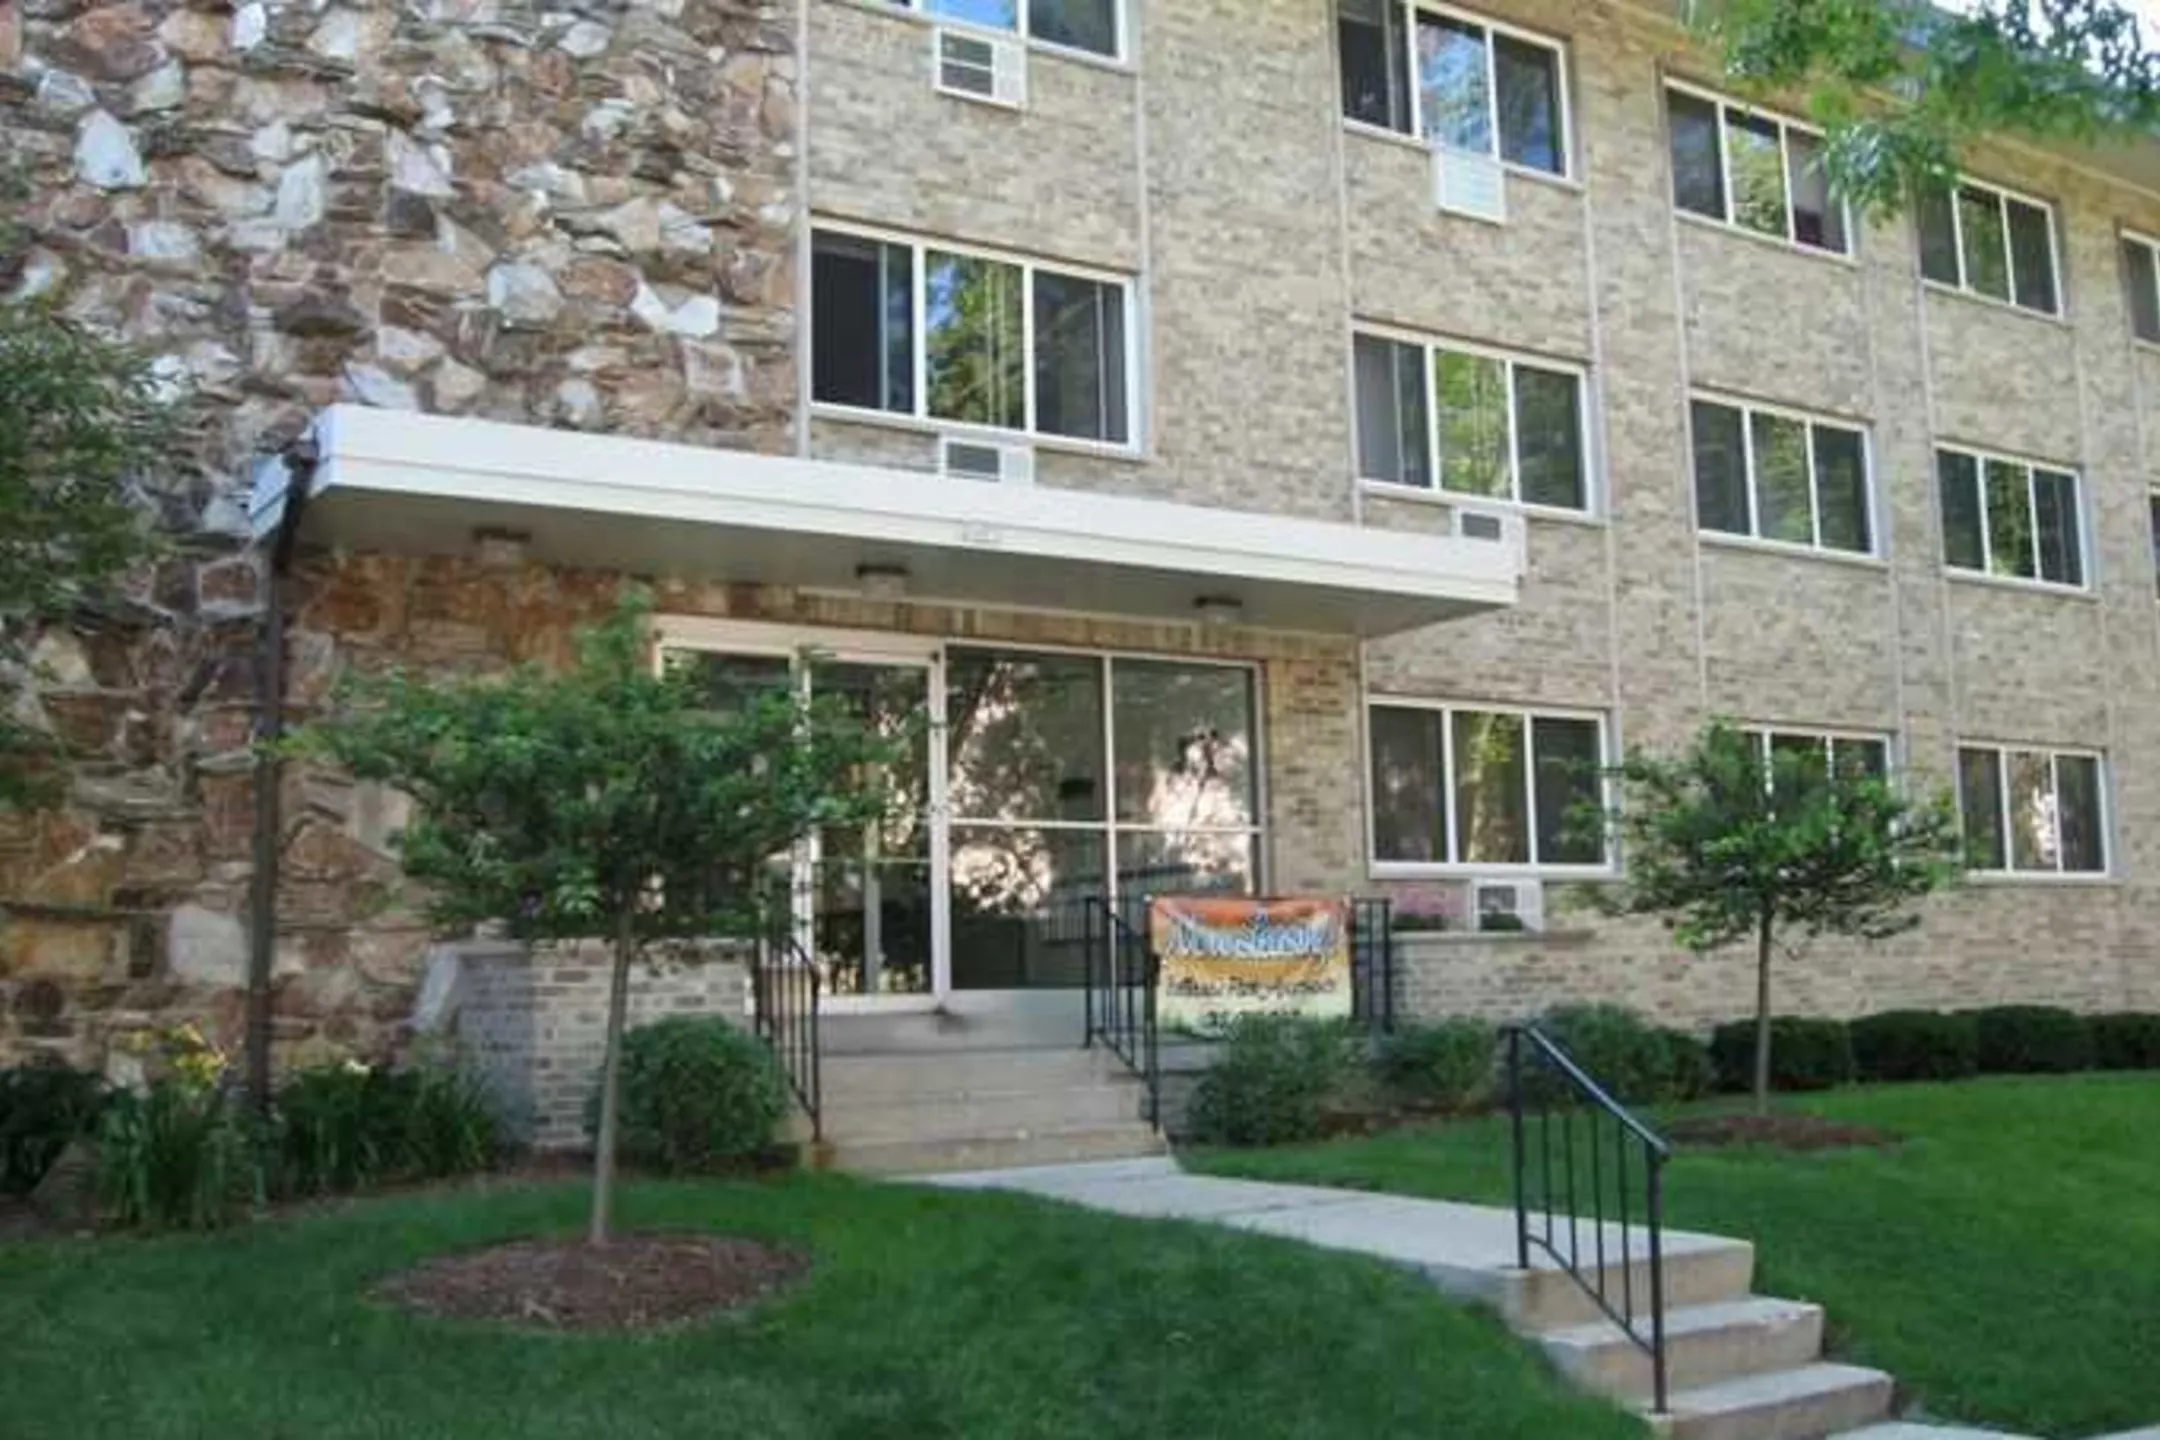 Building - Belleview Park Apartments - Milwaukee, WI